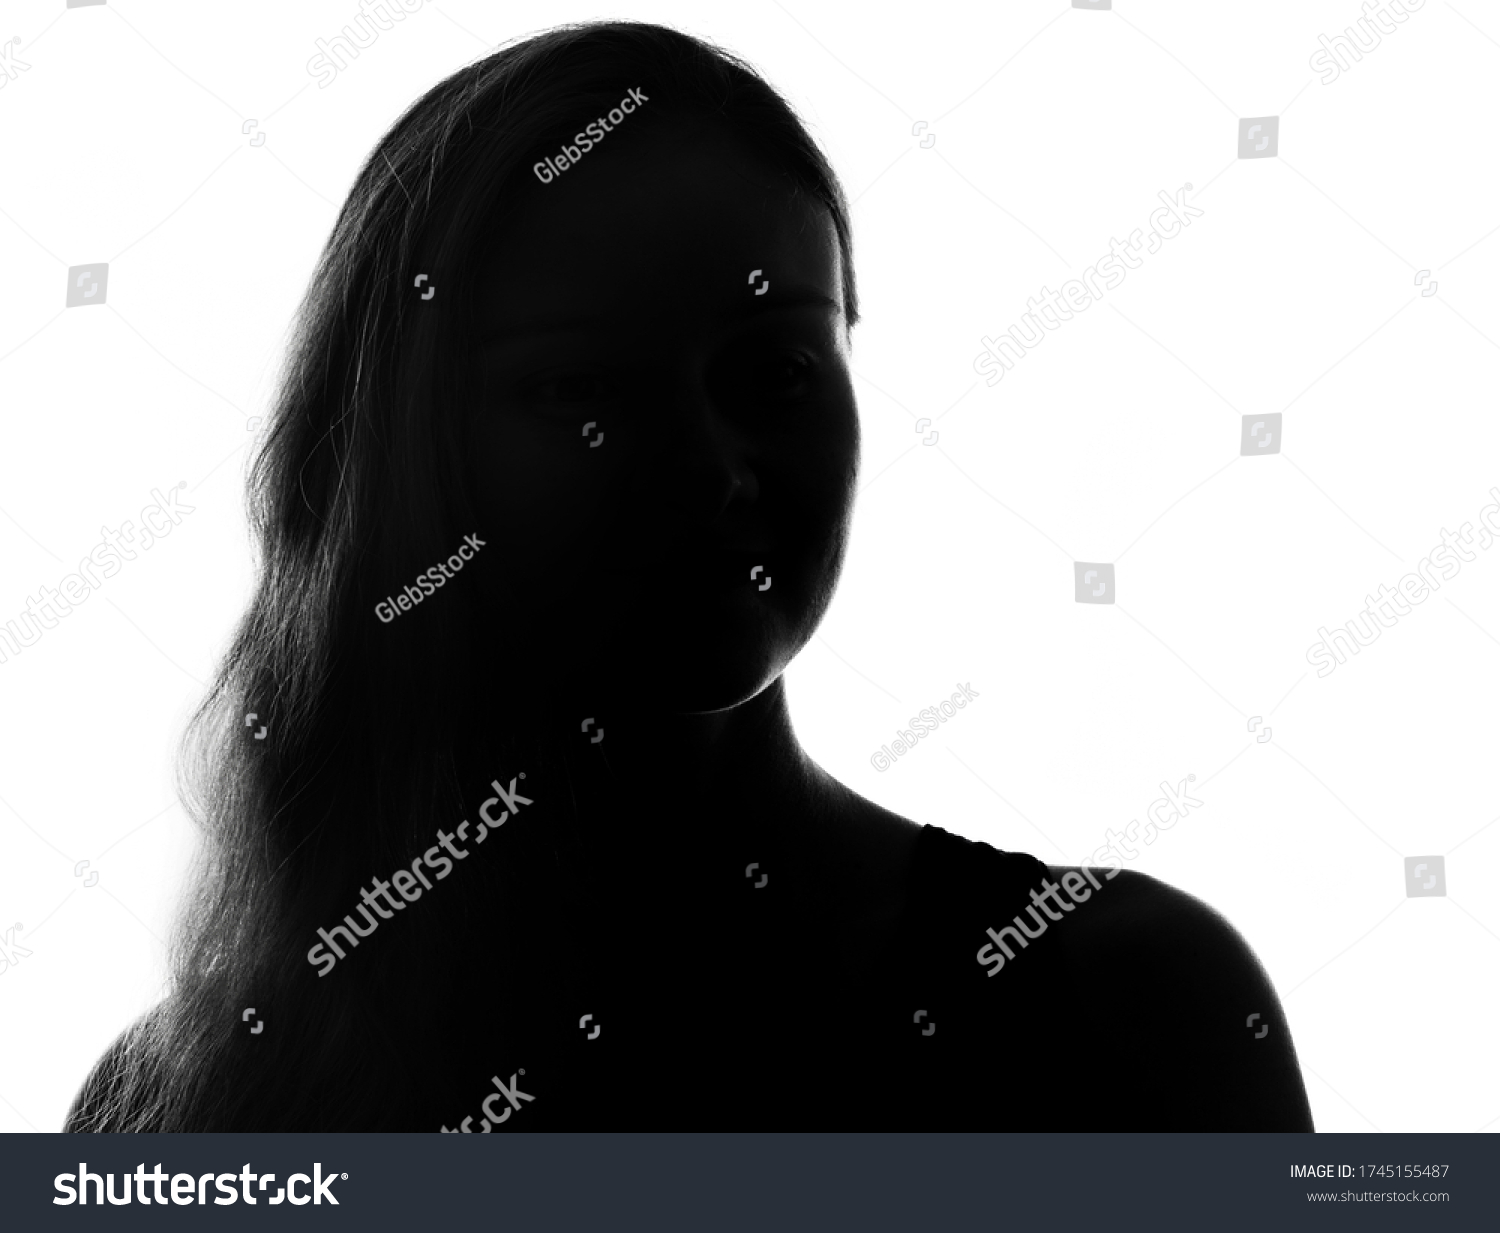 Female person silhouette in the shadow, back lit light #1745155487